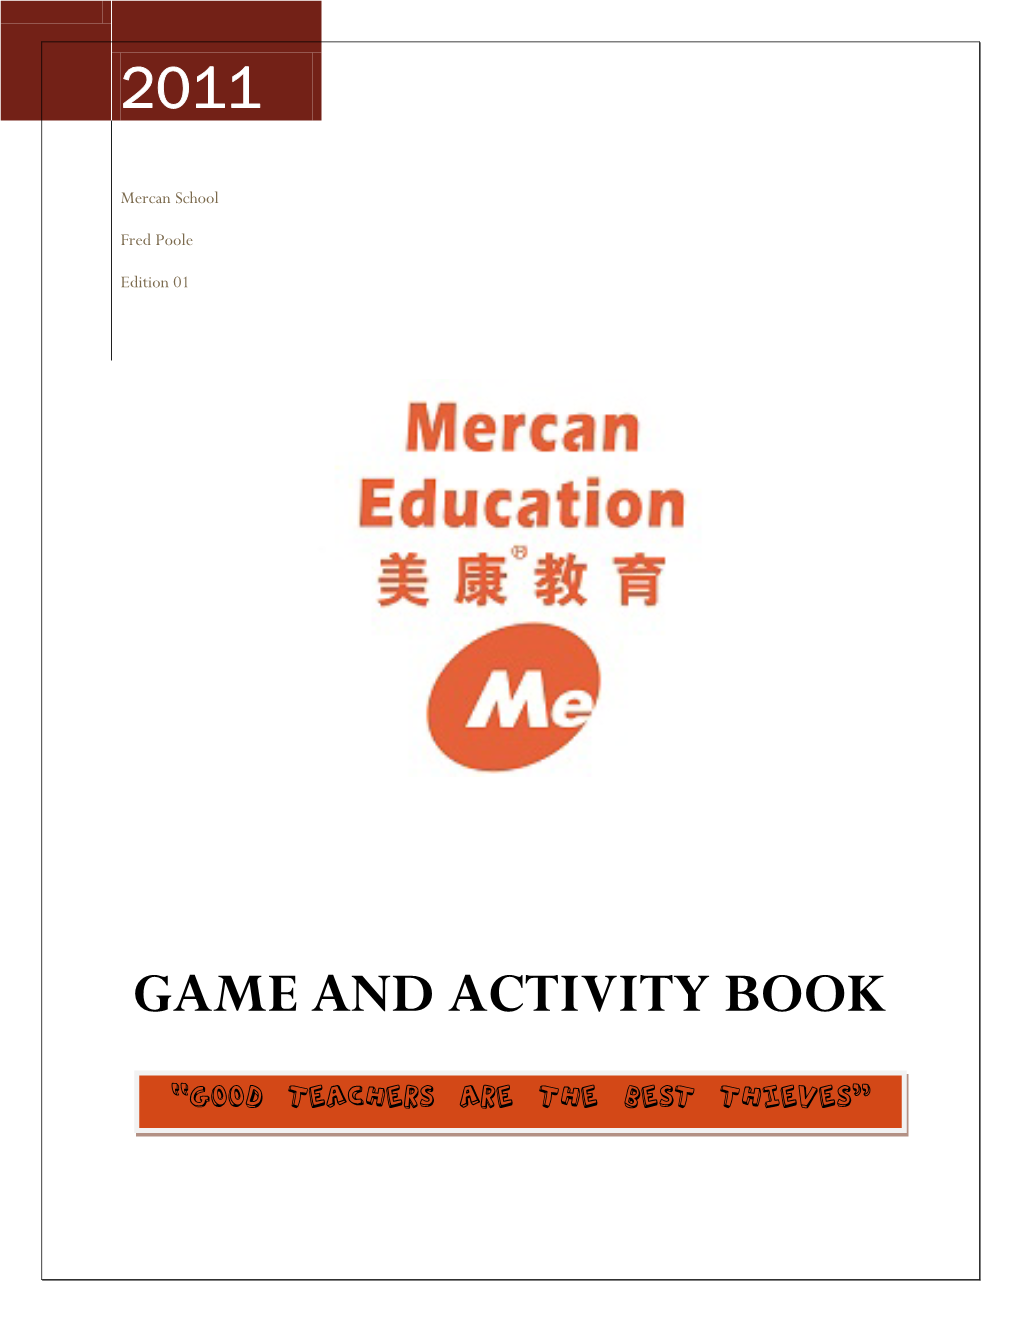 Game and Activity Book